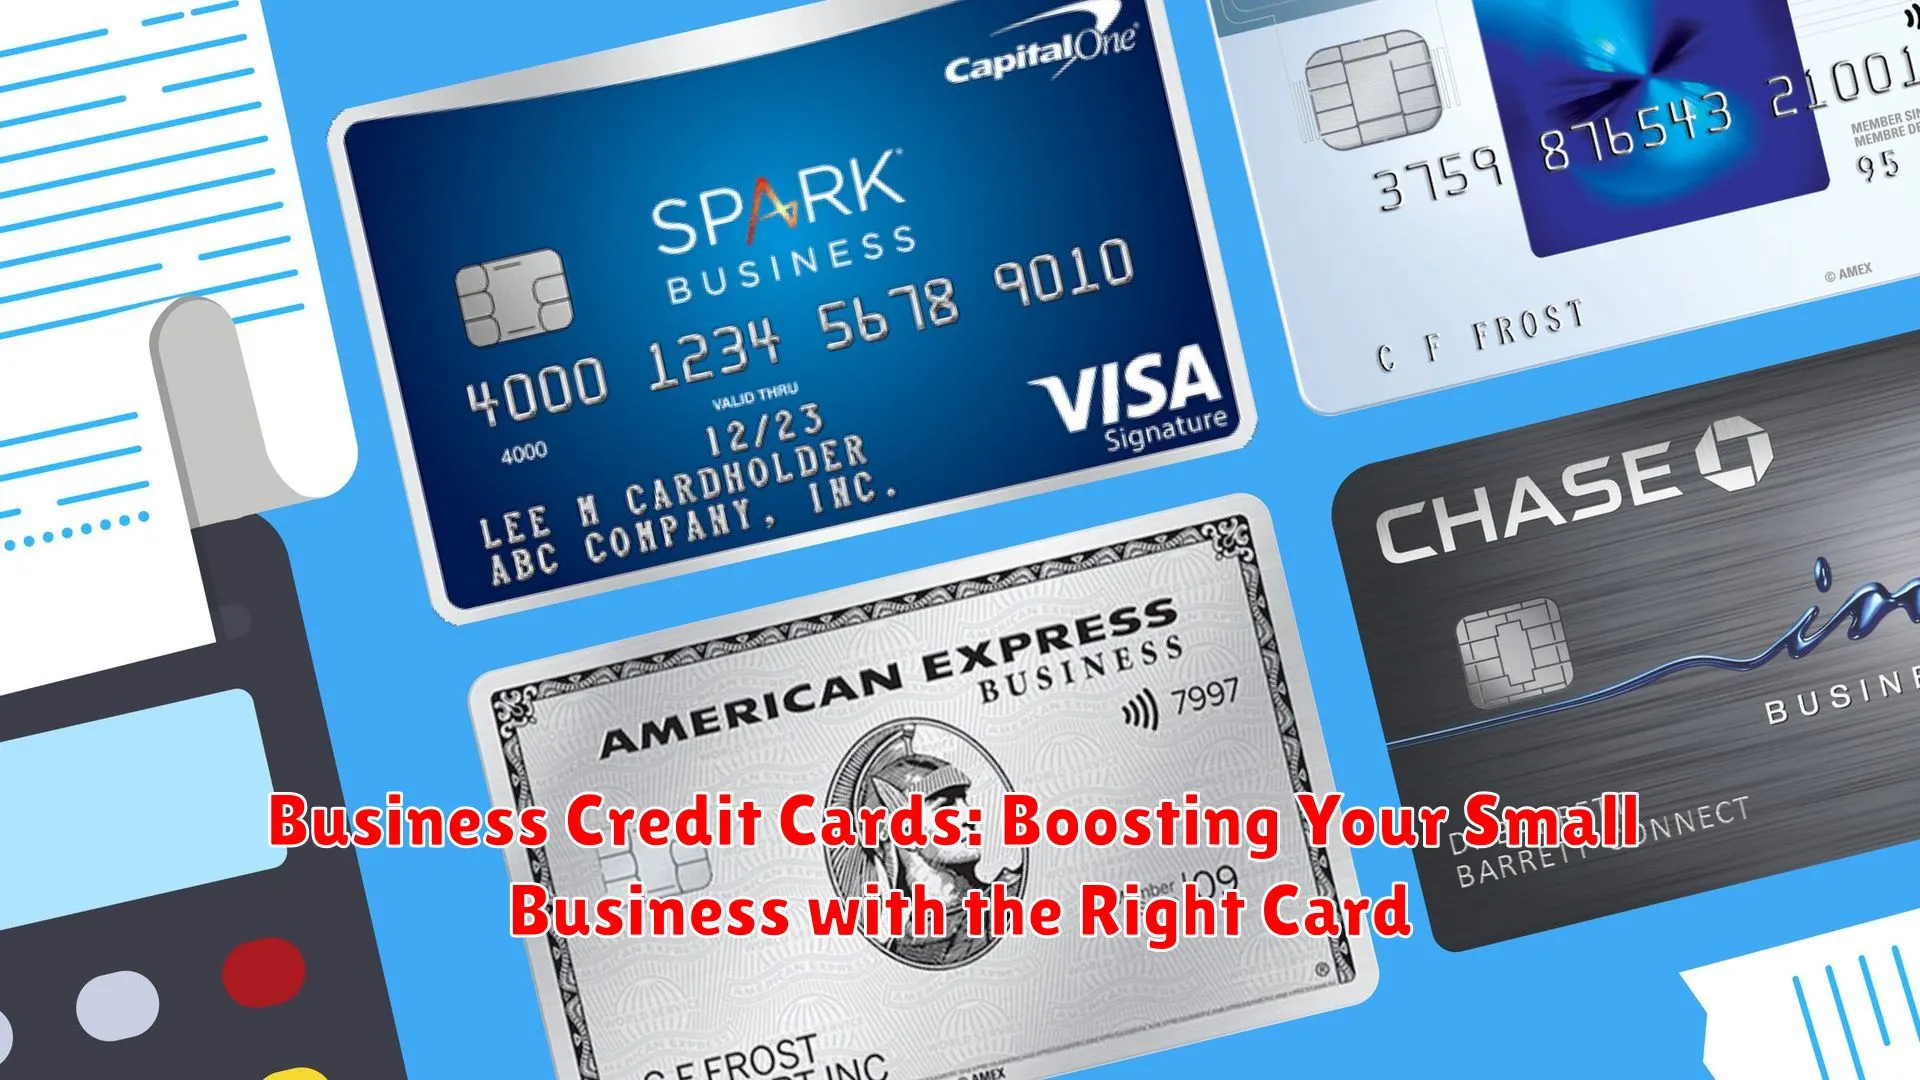 Business Credit Cards: Boosting Your Small Business with the Right Card